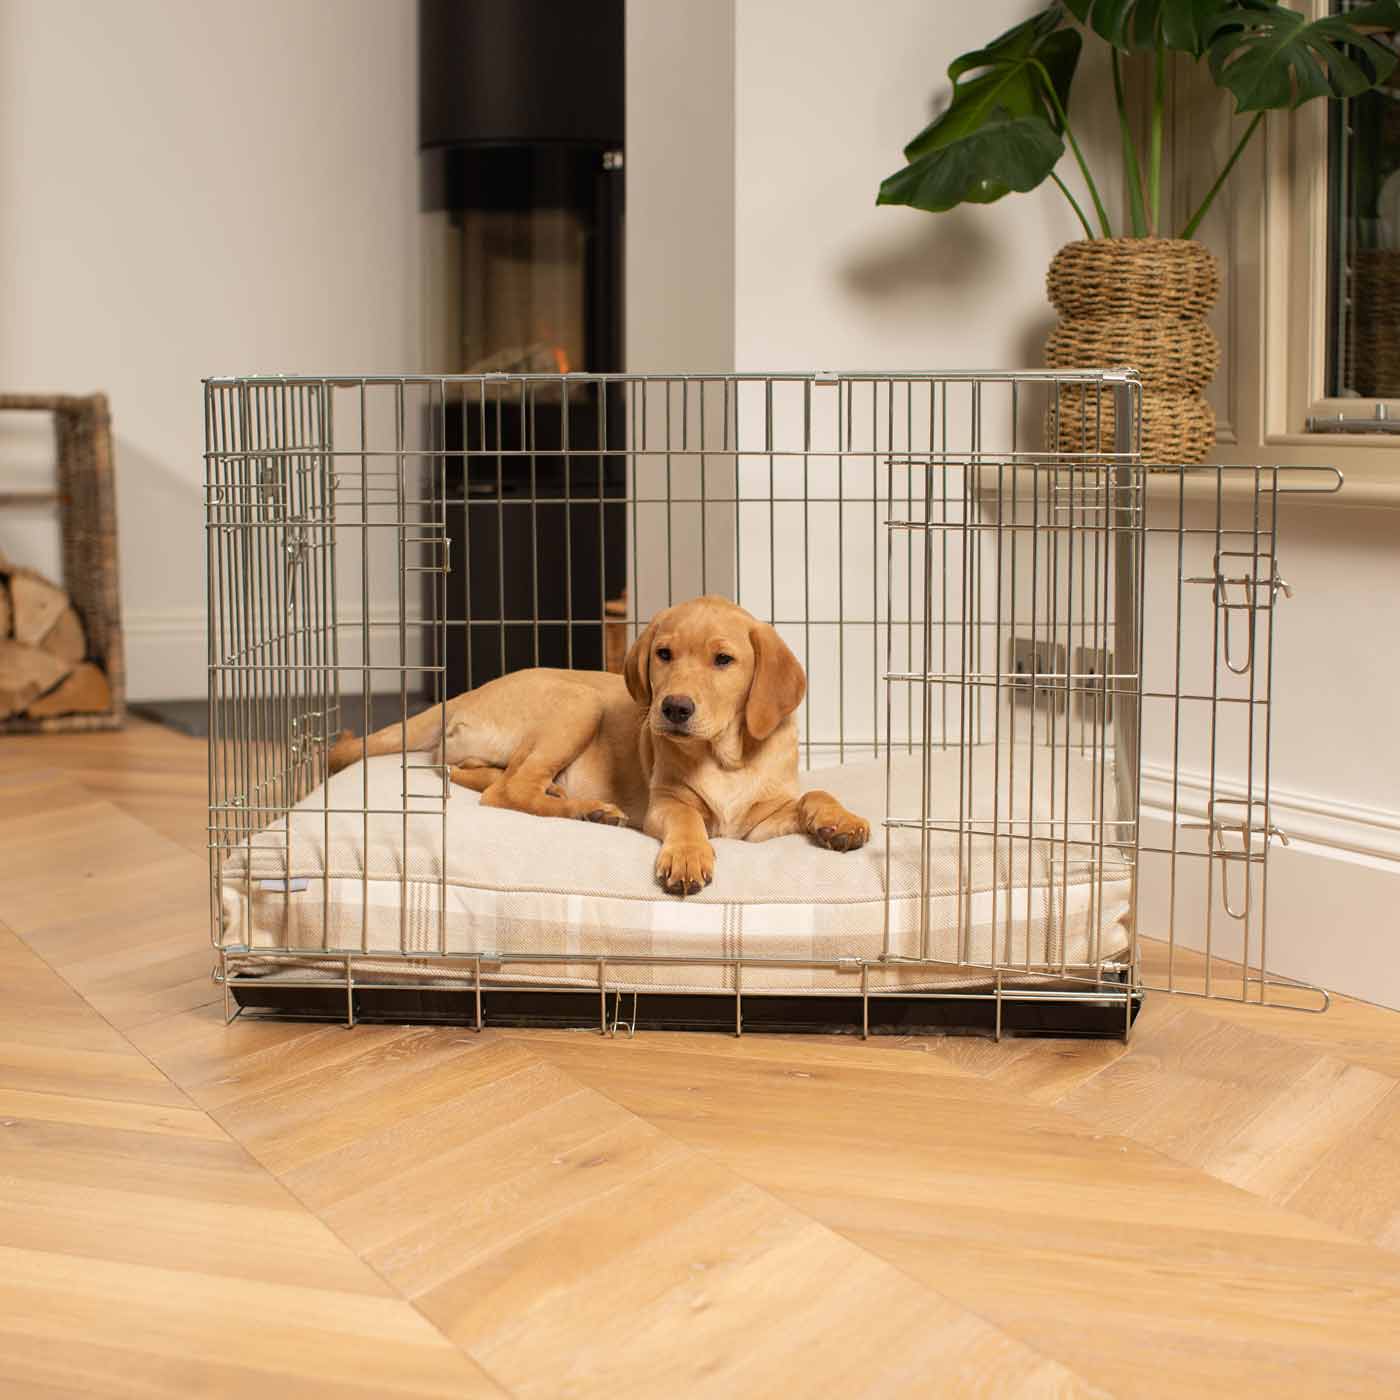 Luxury Silver Dog Cage With Cushion, The Perfect Dog Cage For The Ultimate Naptime, Now Available To Personalize at Lords & Labradors US